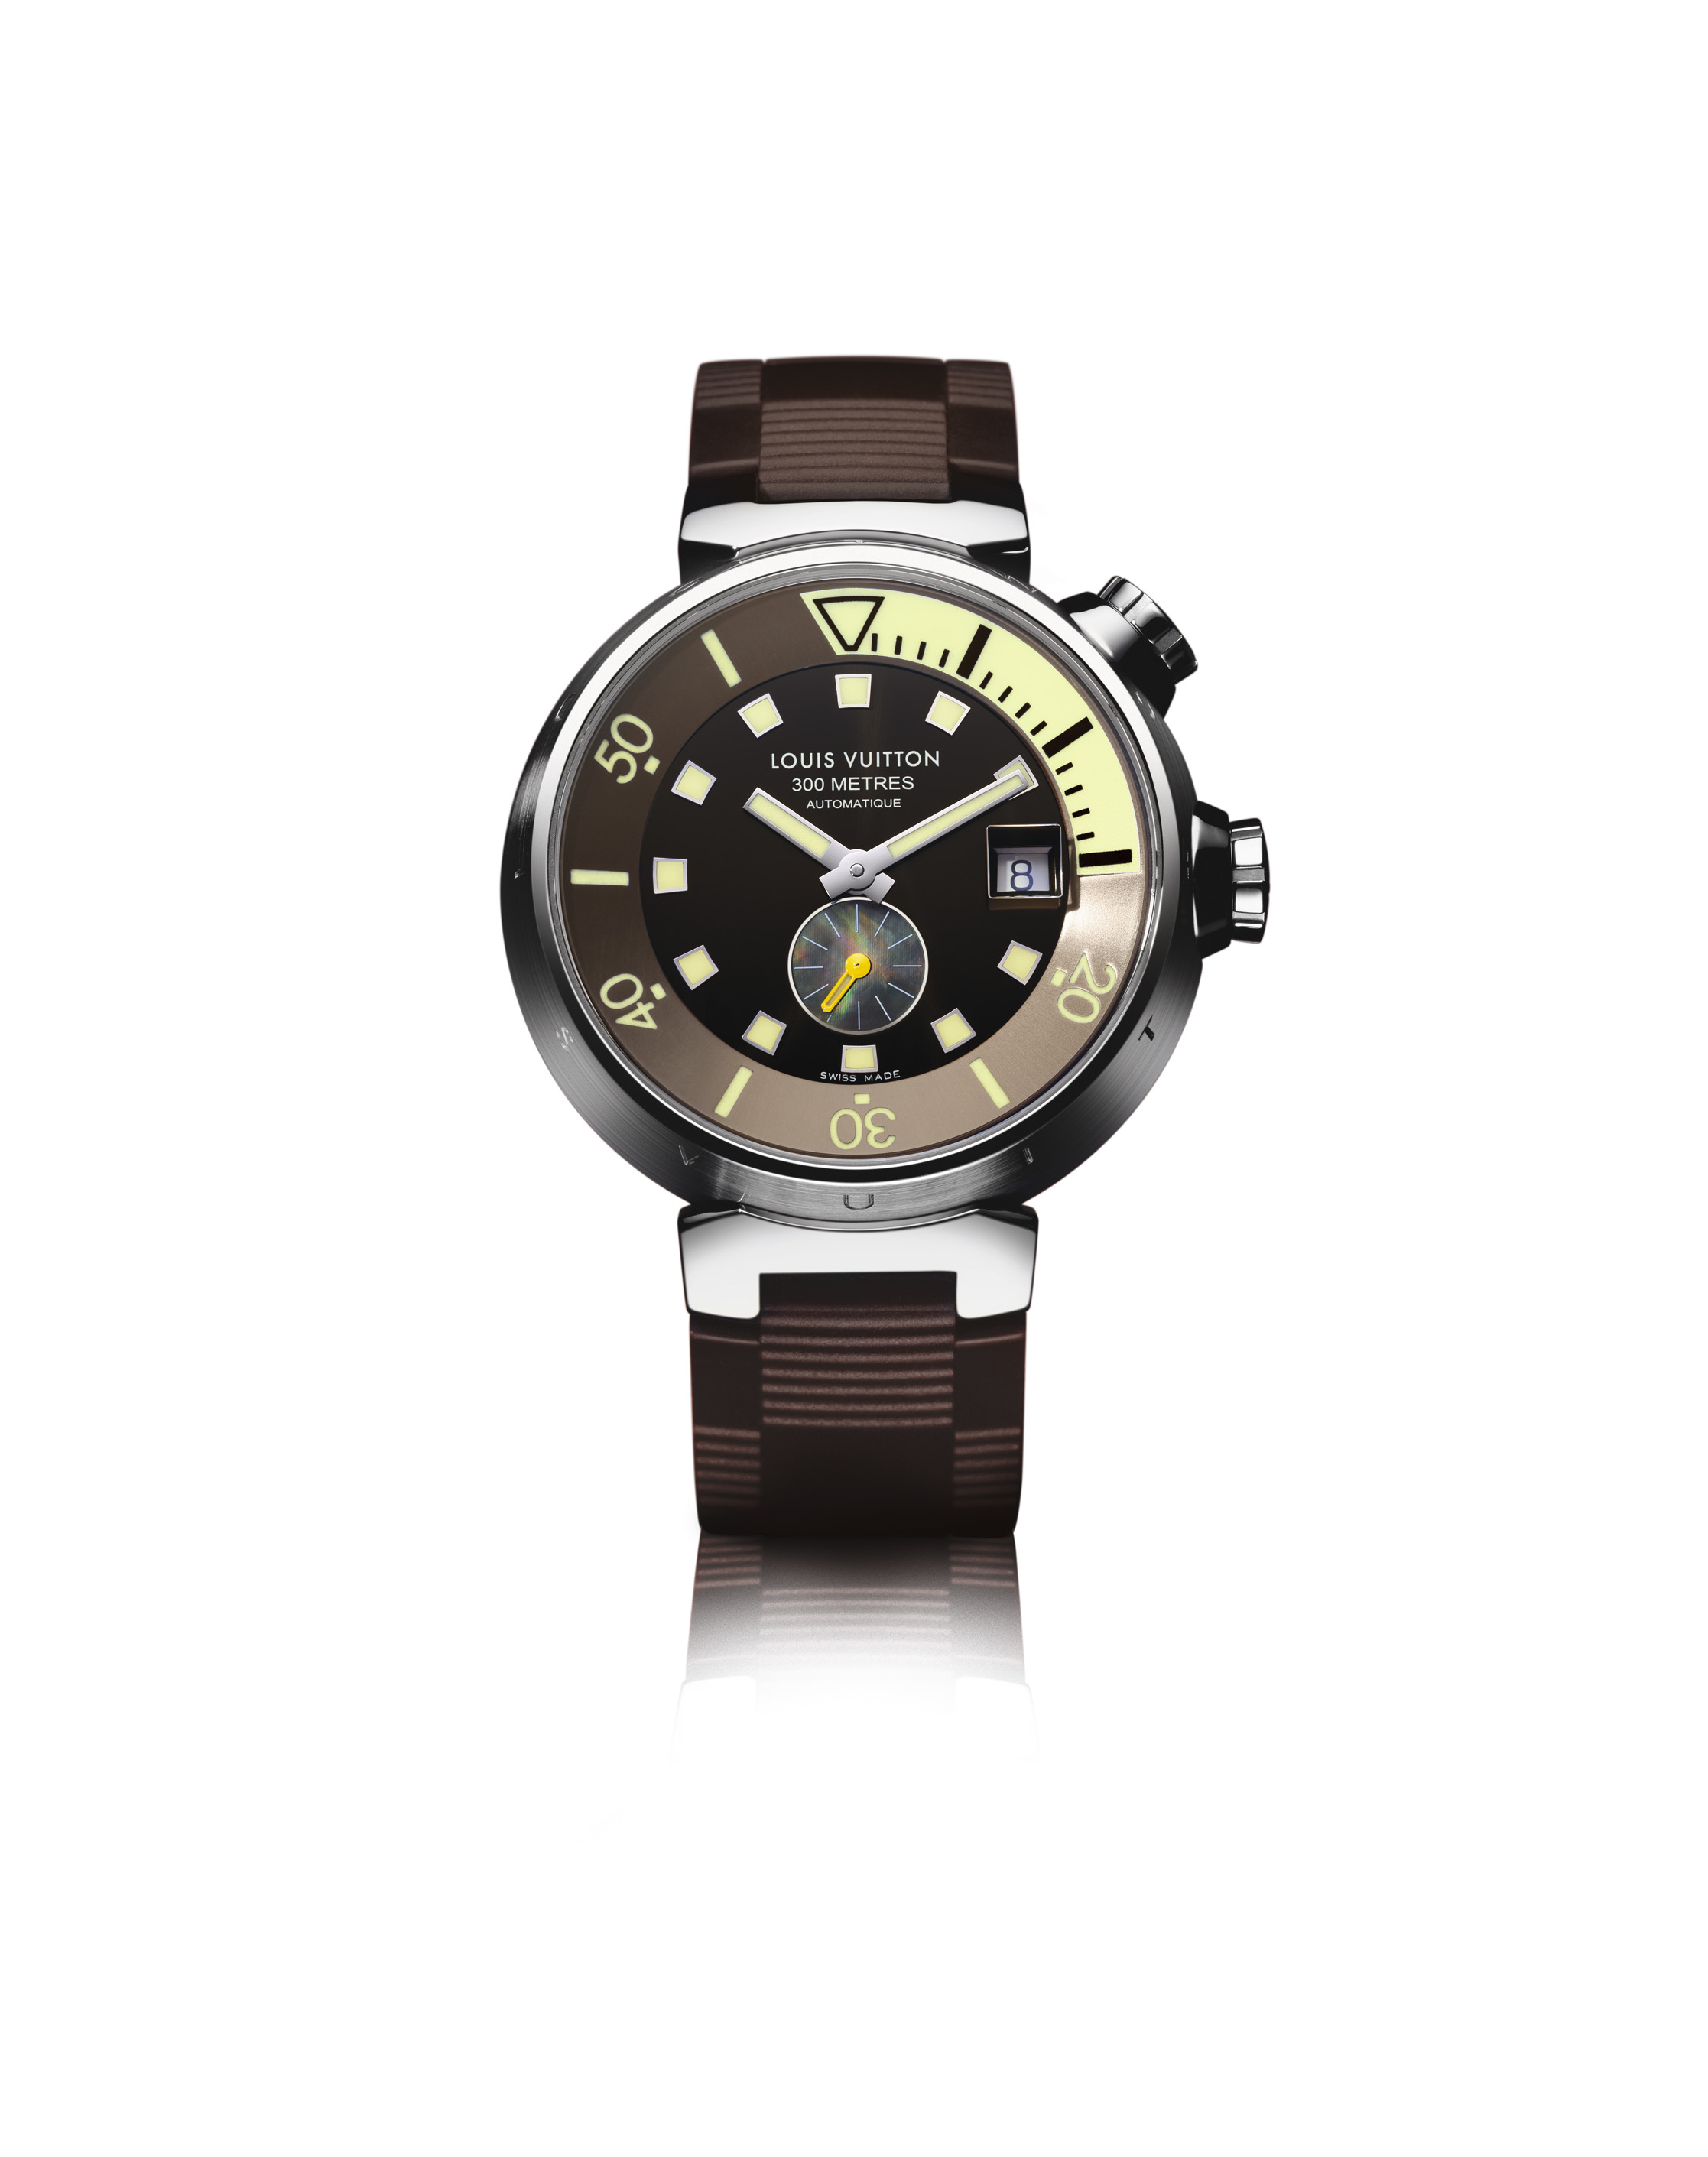 70's Retro Done Well: Louis Vuitton Tambour Diver Watch